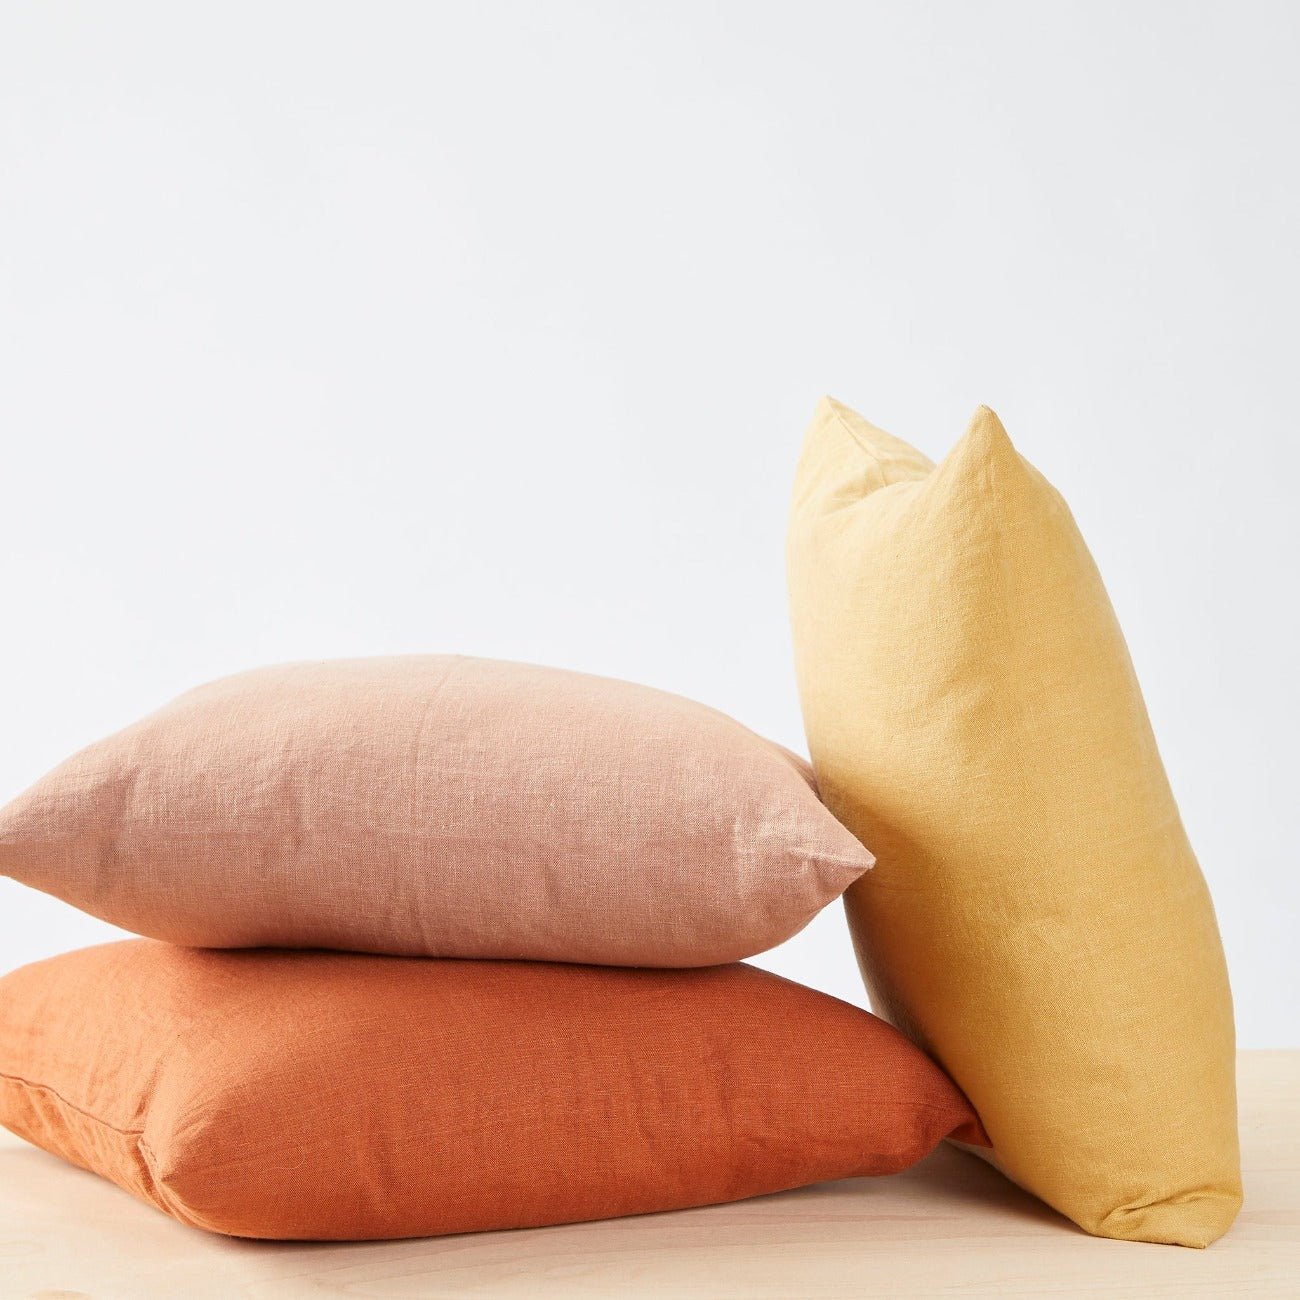 Ambience pillows in Honey, Terracotta and Canyon Clay.